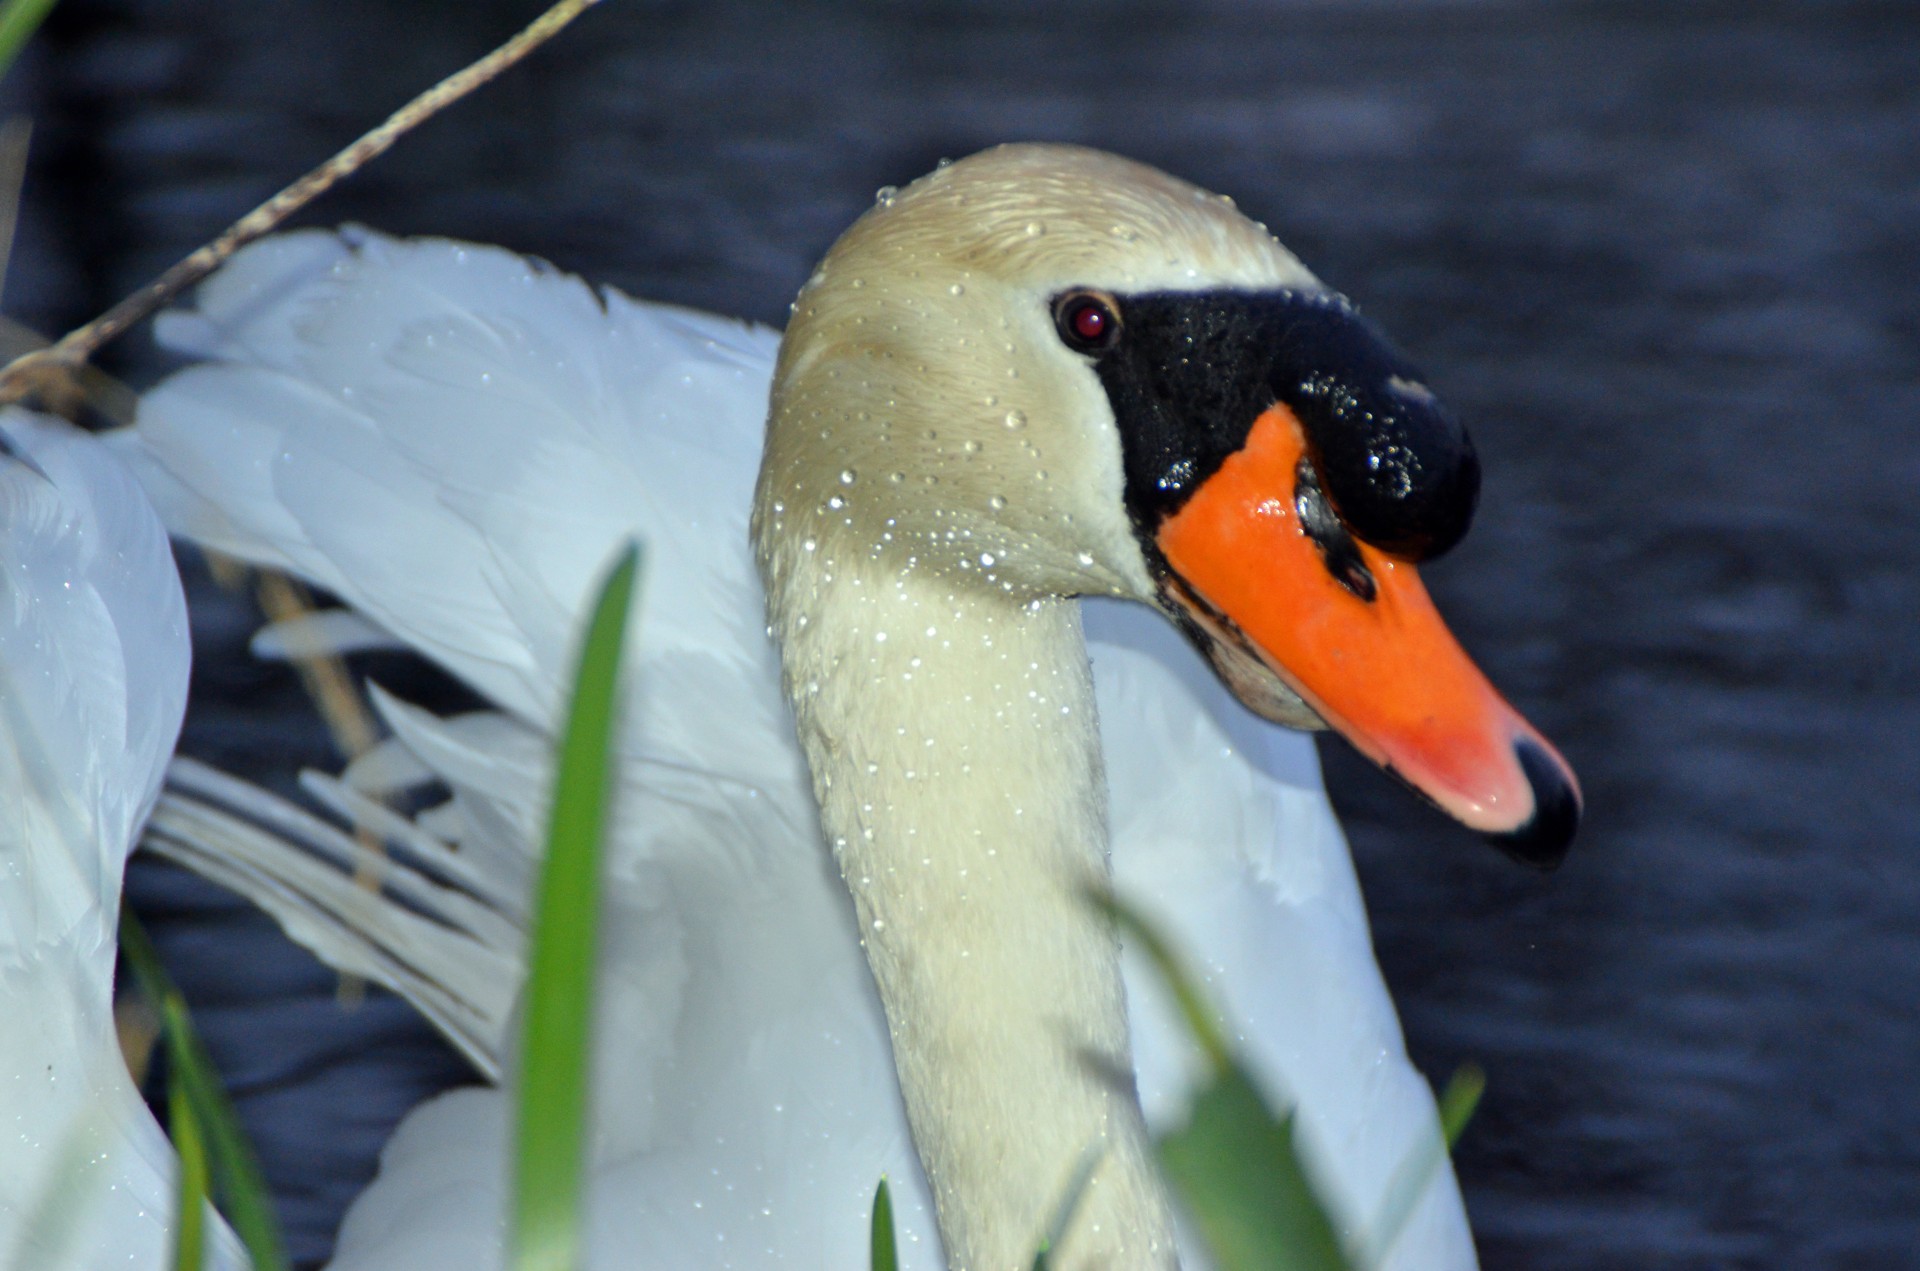 Close up of a swan